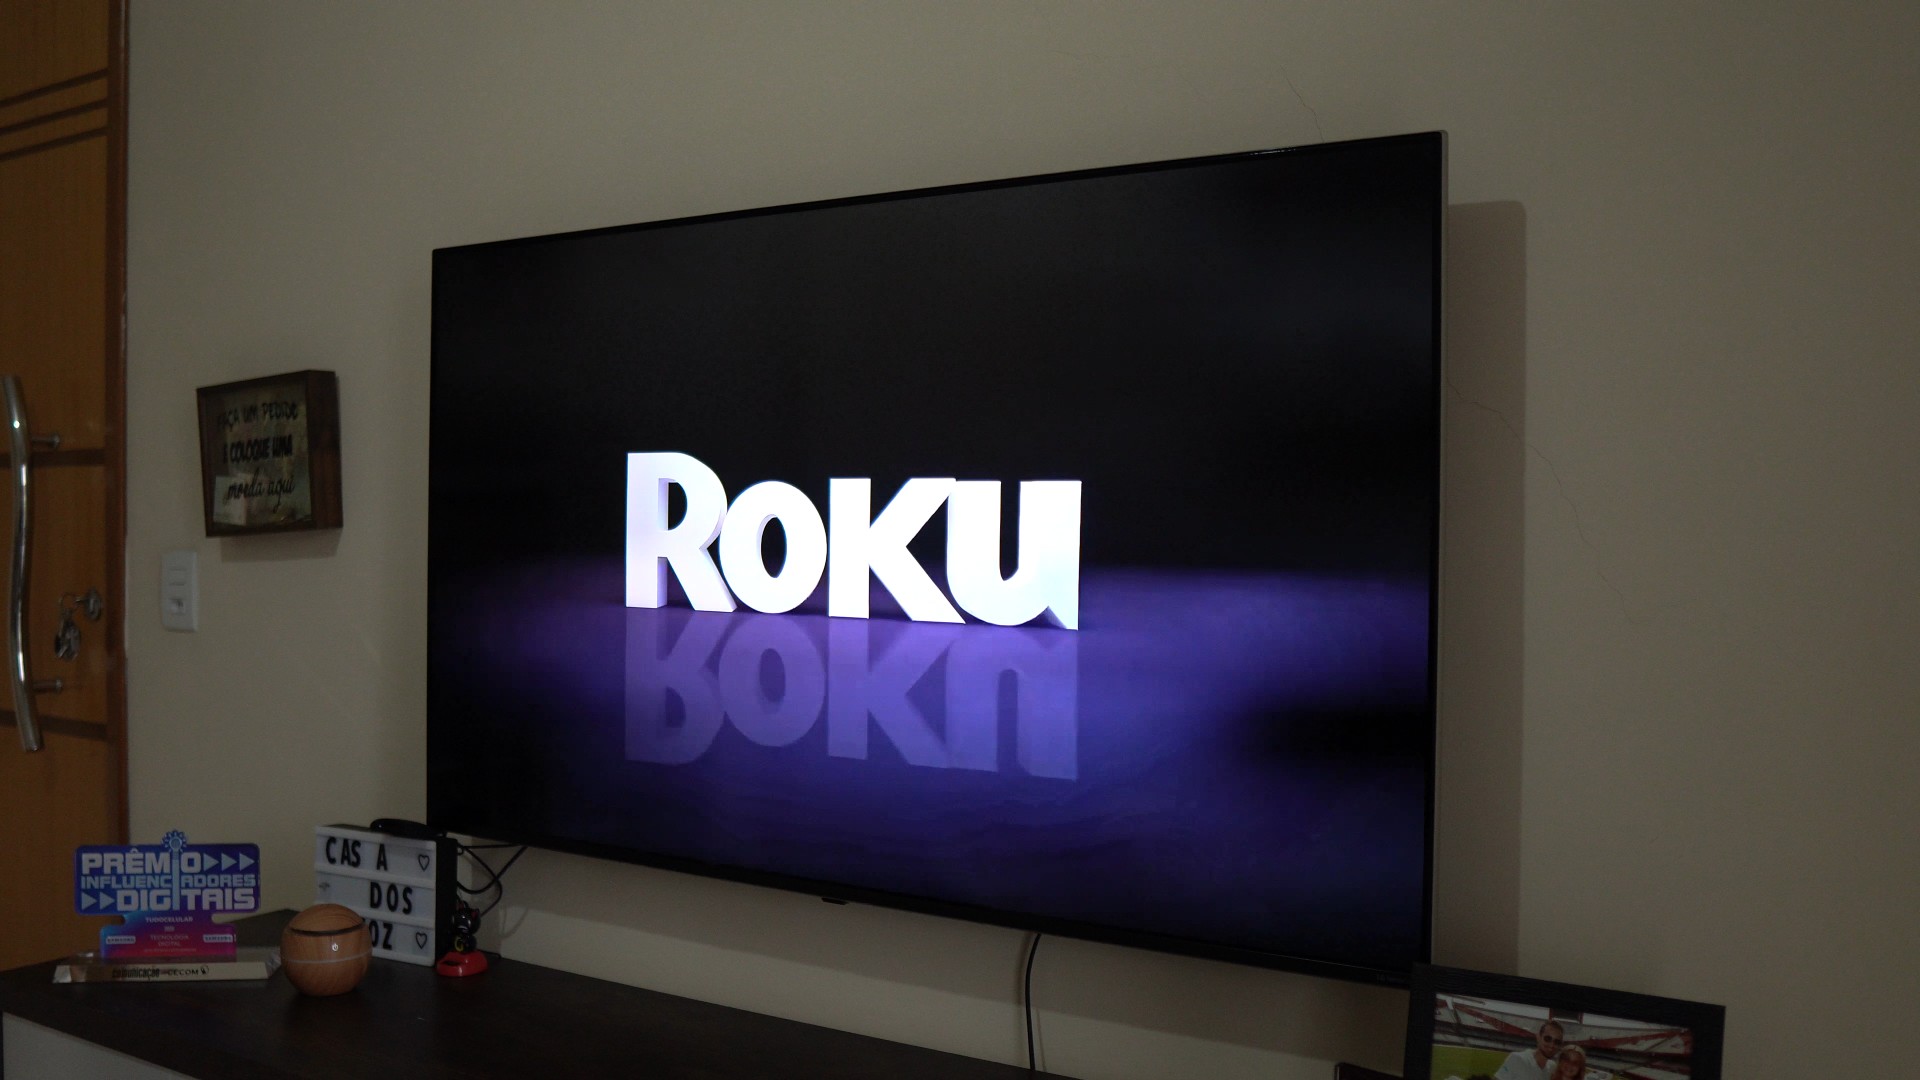 Roku has added a sports section to the streaming service’s home screen